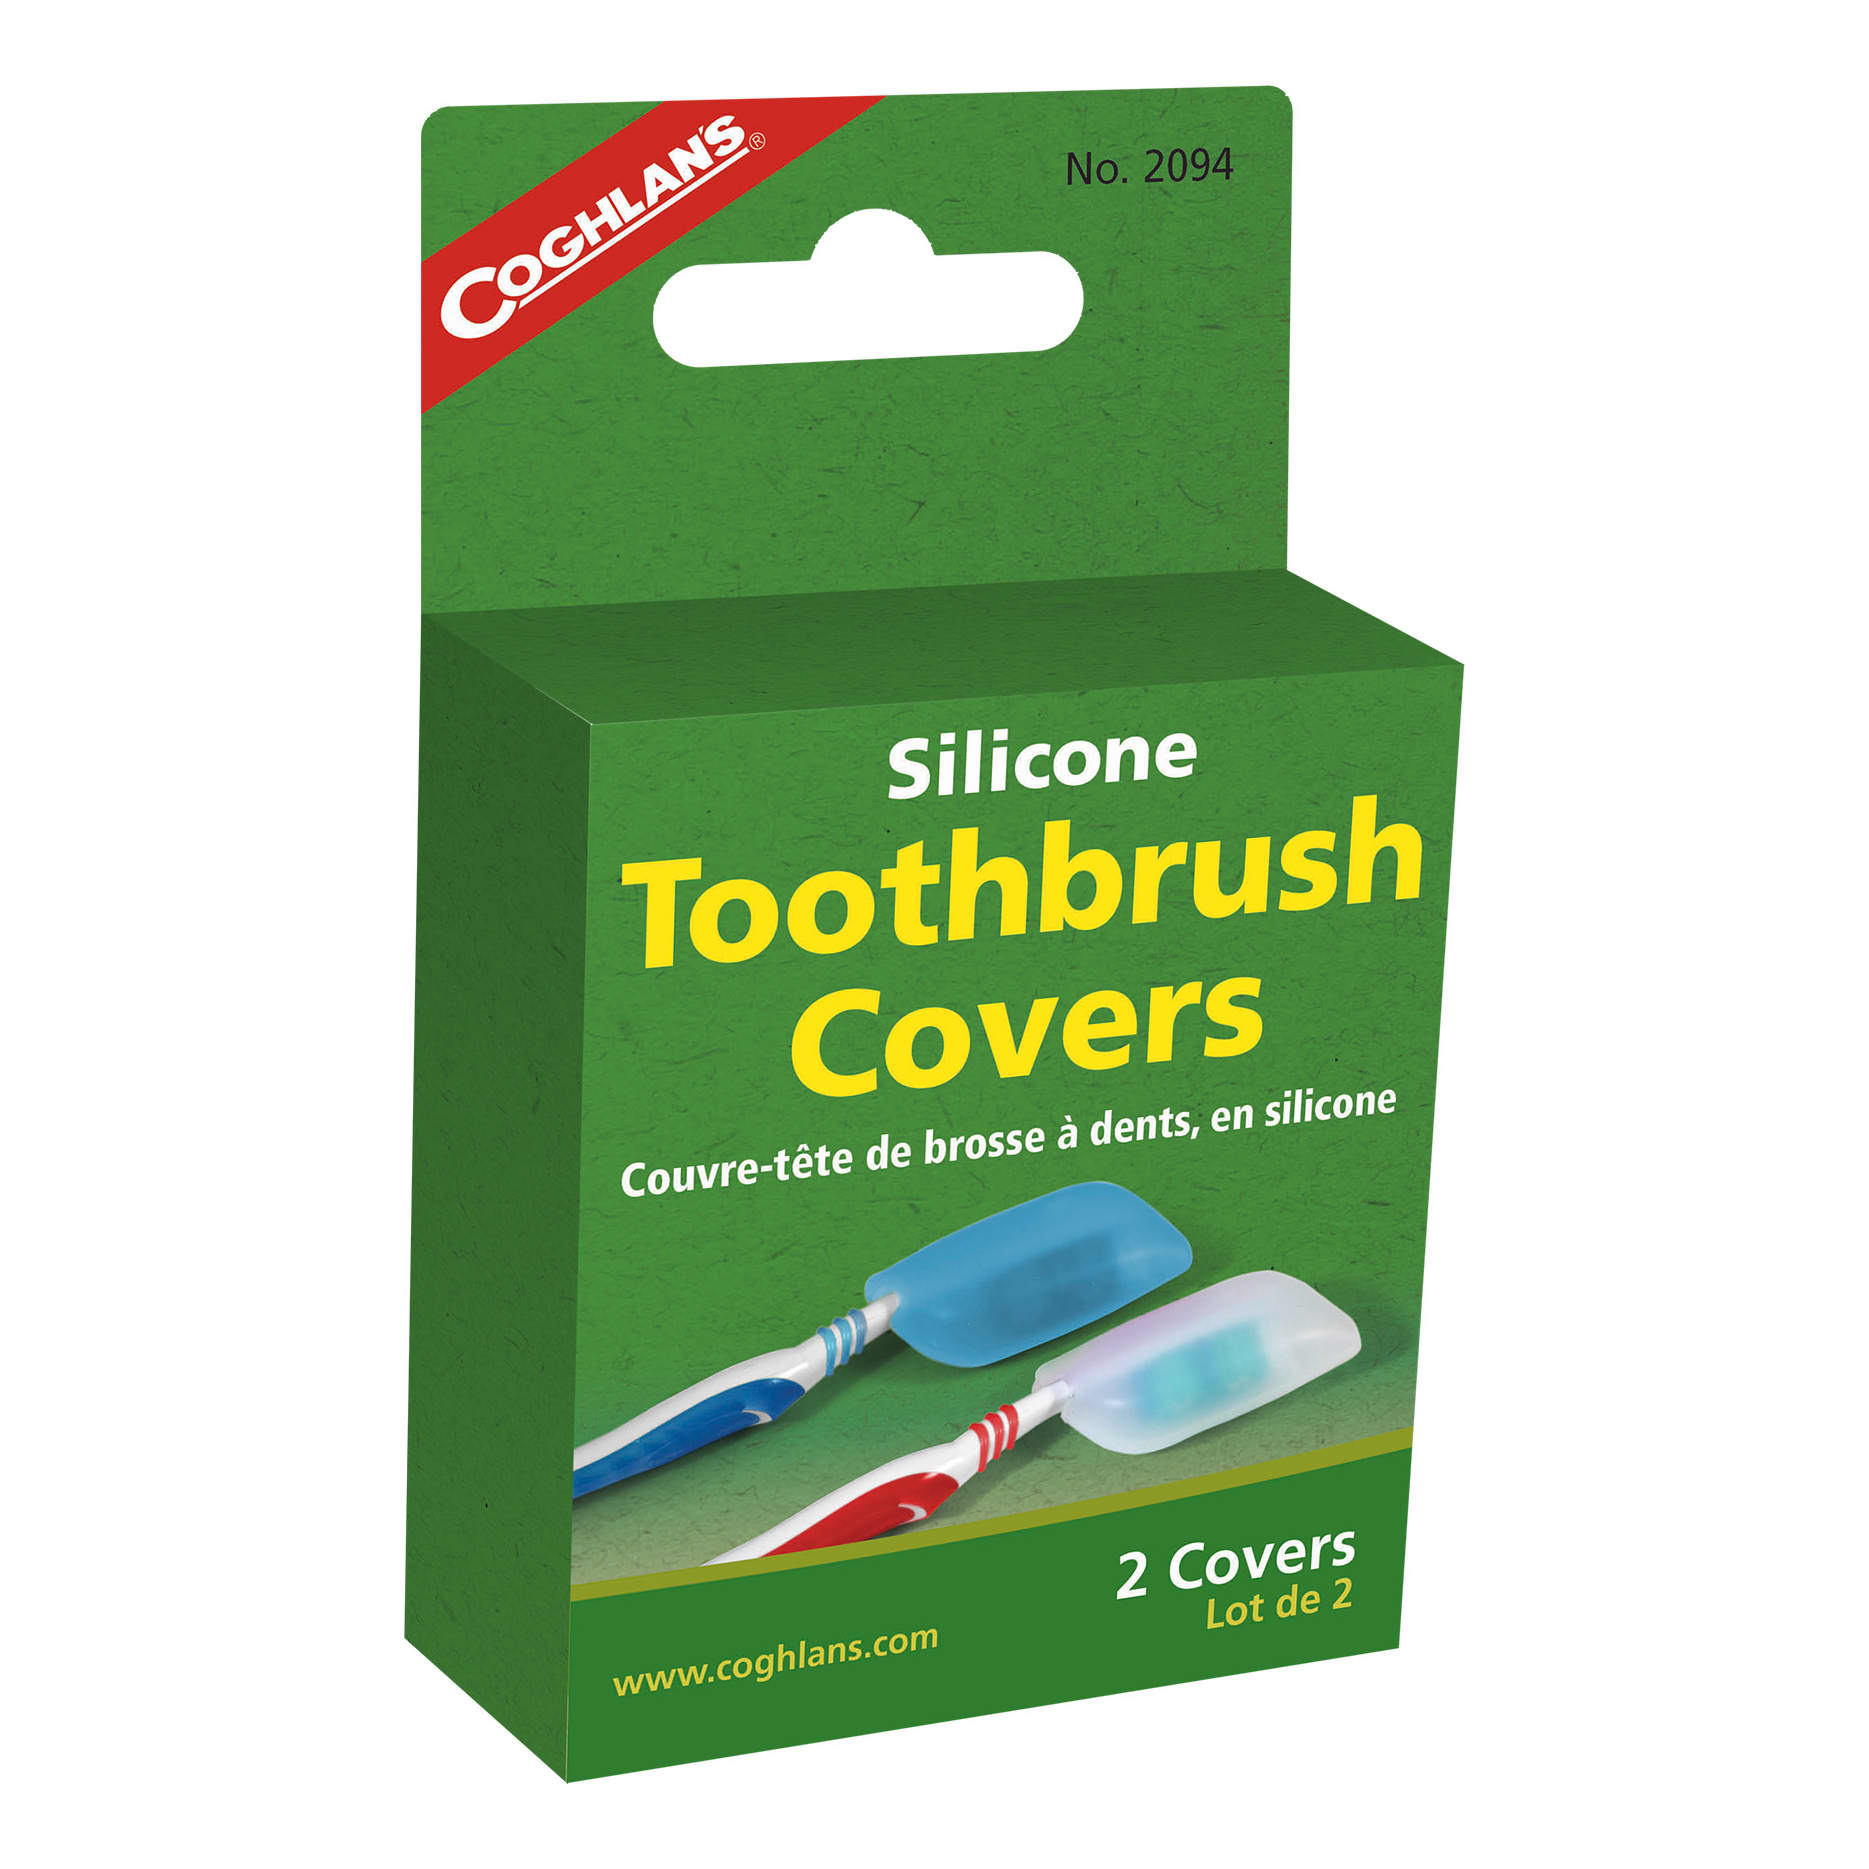 Coghlan's® Silicone Toothbrush Covers - 2 Pack